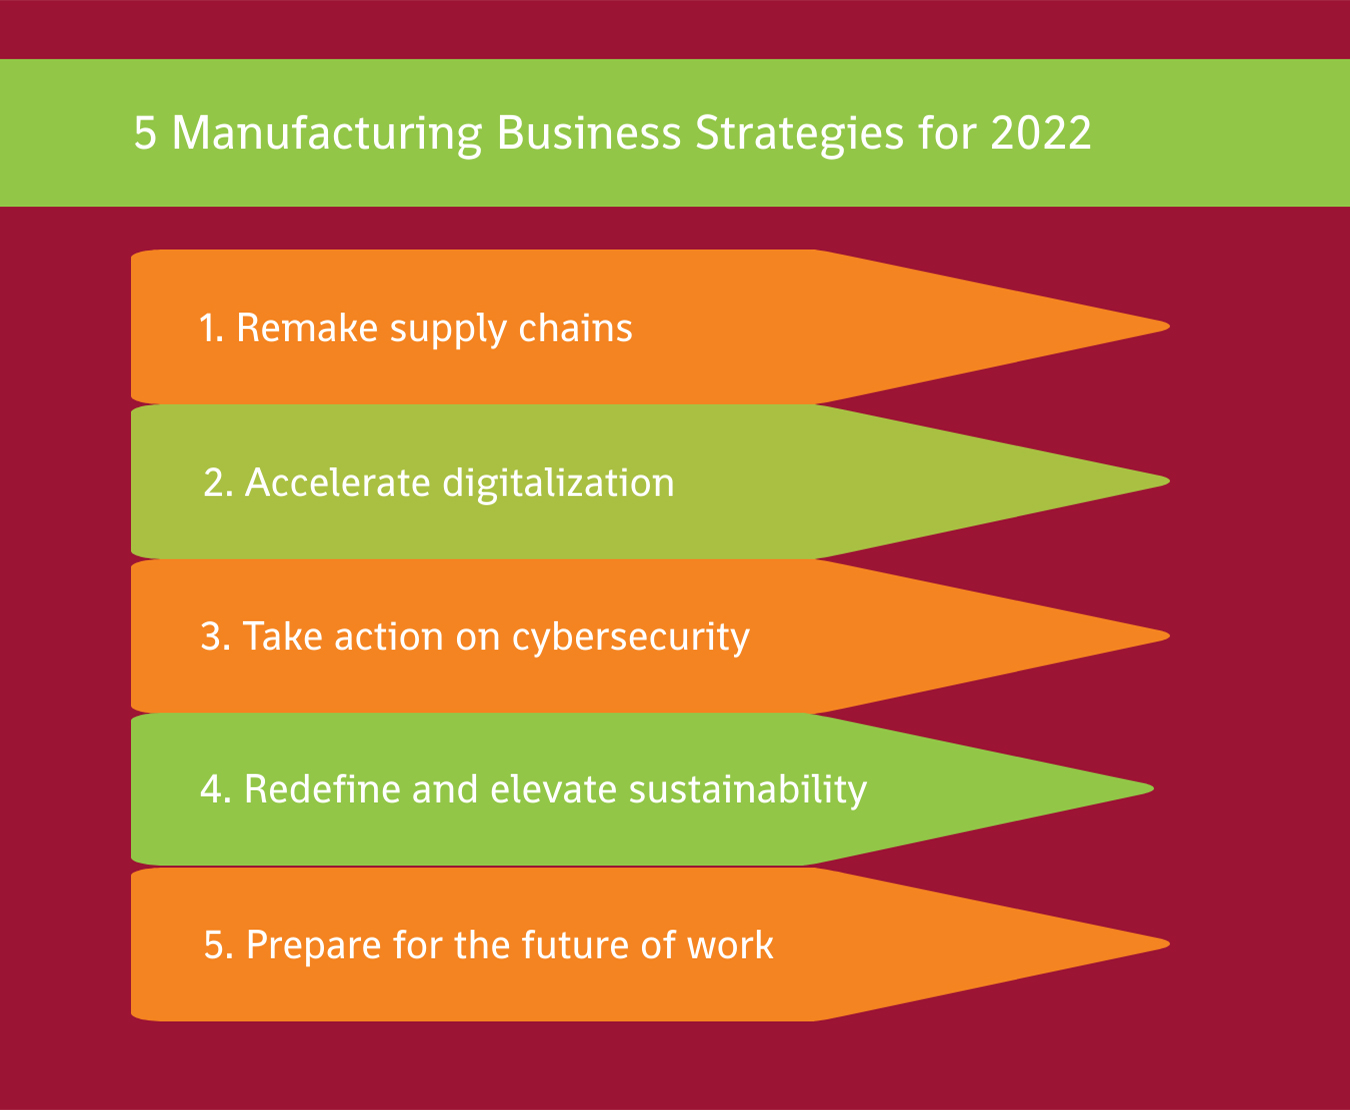 Manufacturing Business Strategies for 2022: Remake supply chains; Accelerate digitalization; Take action on cybersecurity; Redefine and elevate sustainability; Prepare for the future of work